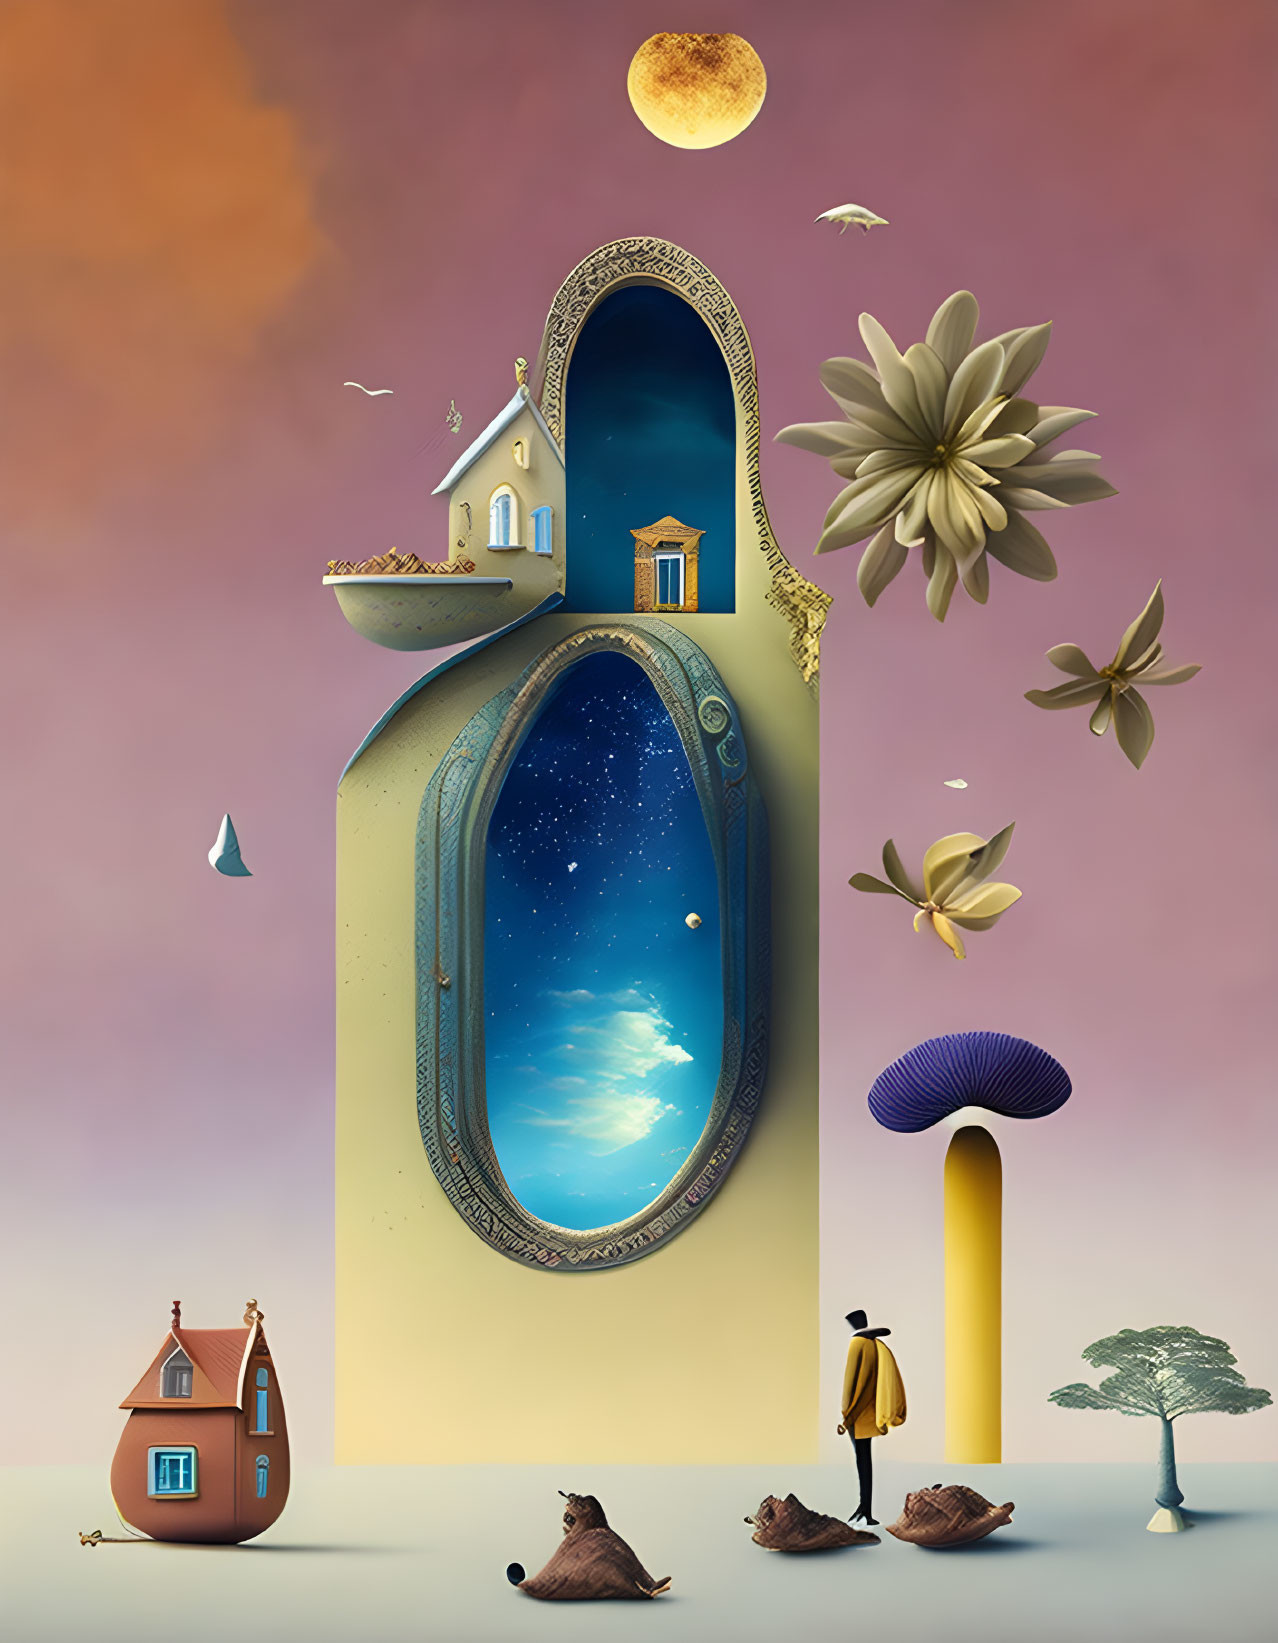 Surreal artwork: man gazes at towering door to starry sky with floating house, flowers